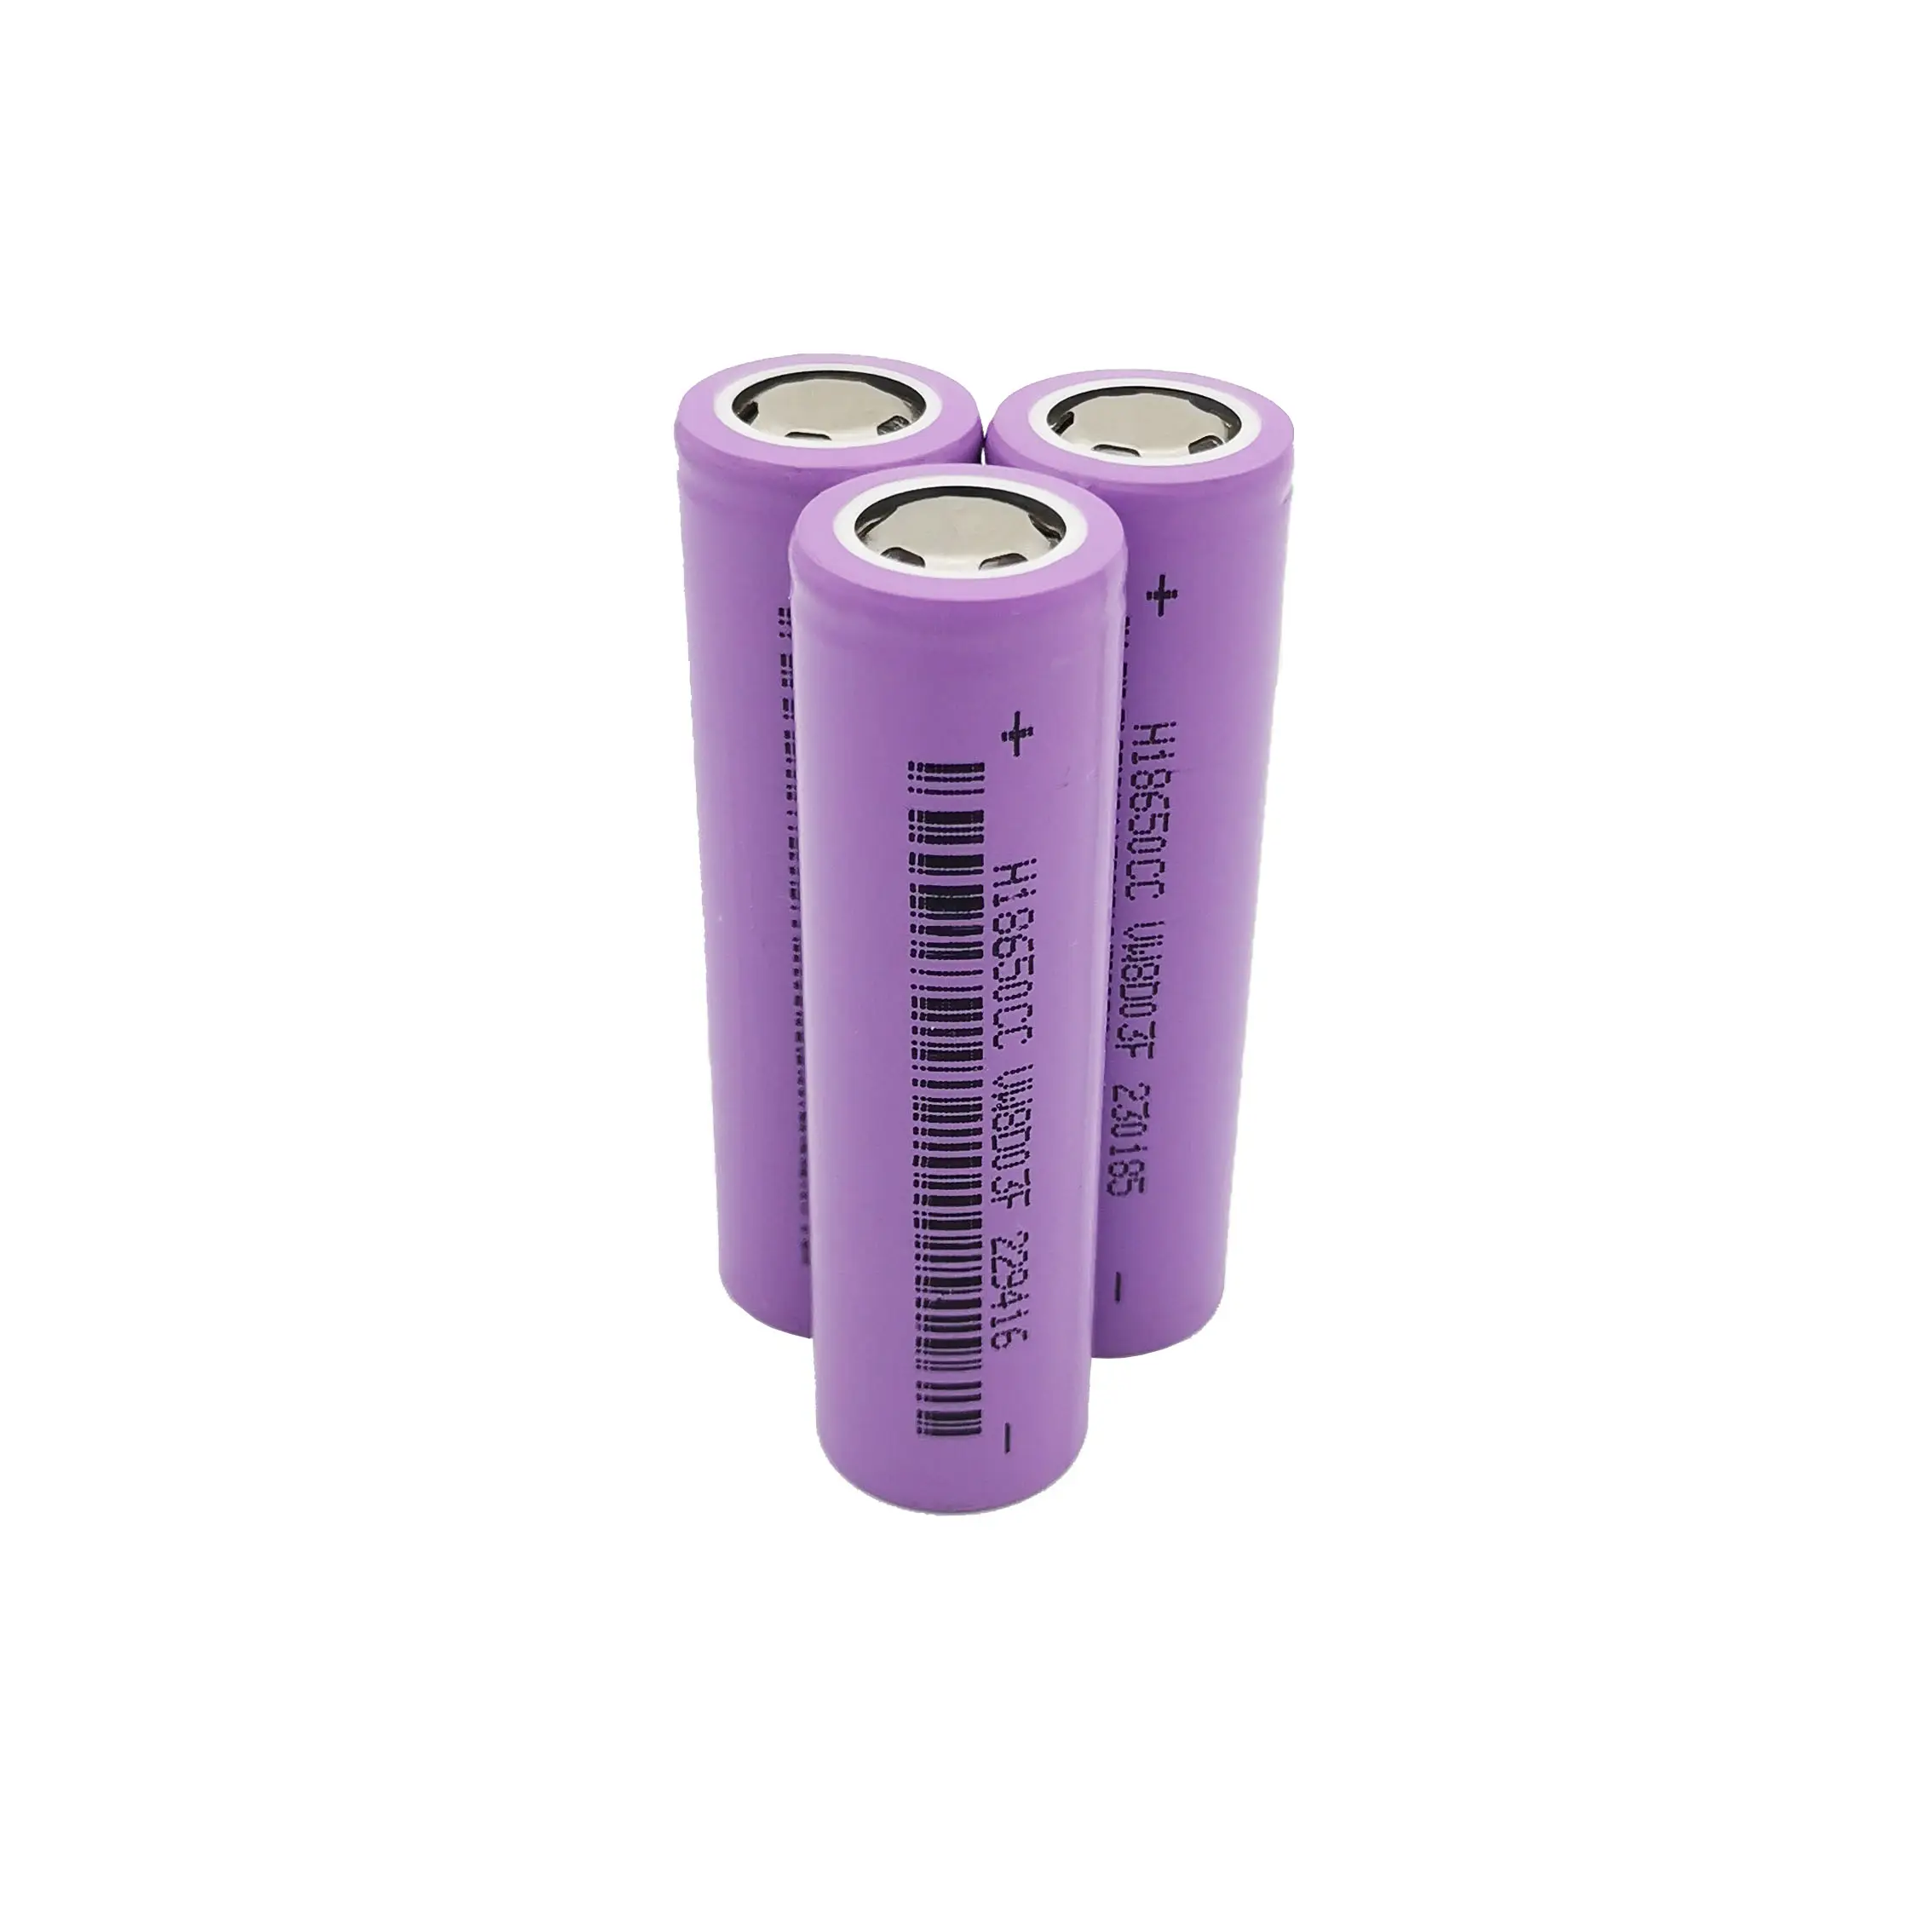 Factory Price Lithium Battery 18650 3.7V 2200mAh Rechargeable Battery for Home Appliances